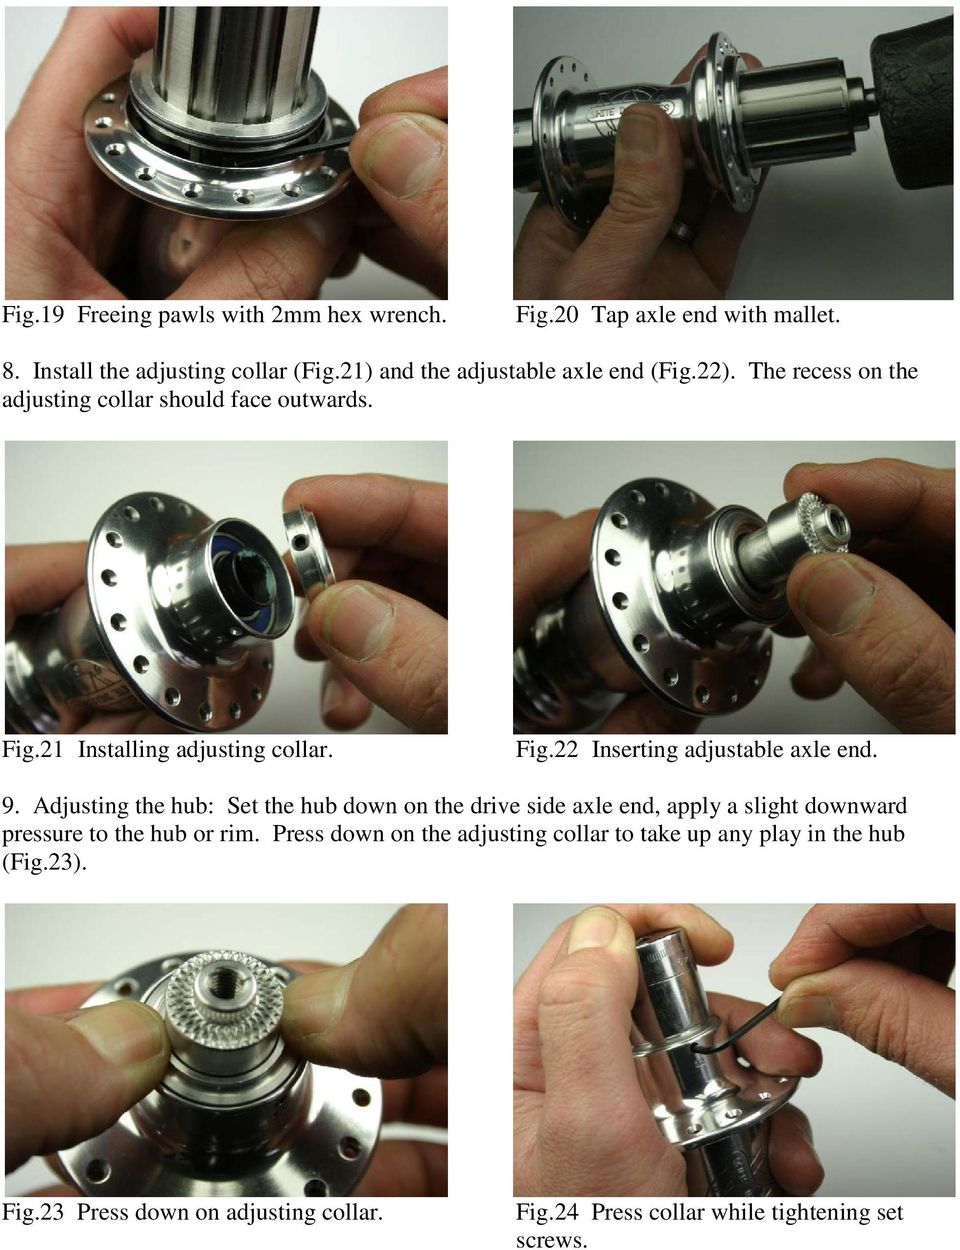 9. Adjusting the hub: Set the hub down on the drive side axle end, apply a slight downward pressure to the hub or rim.